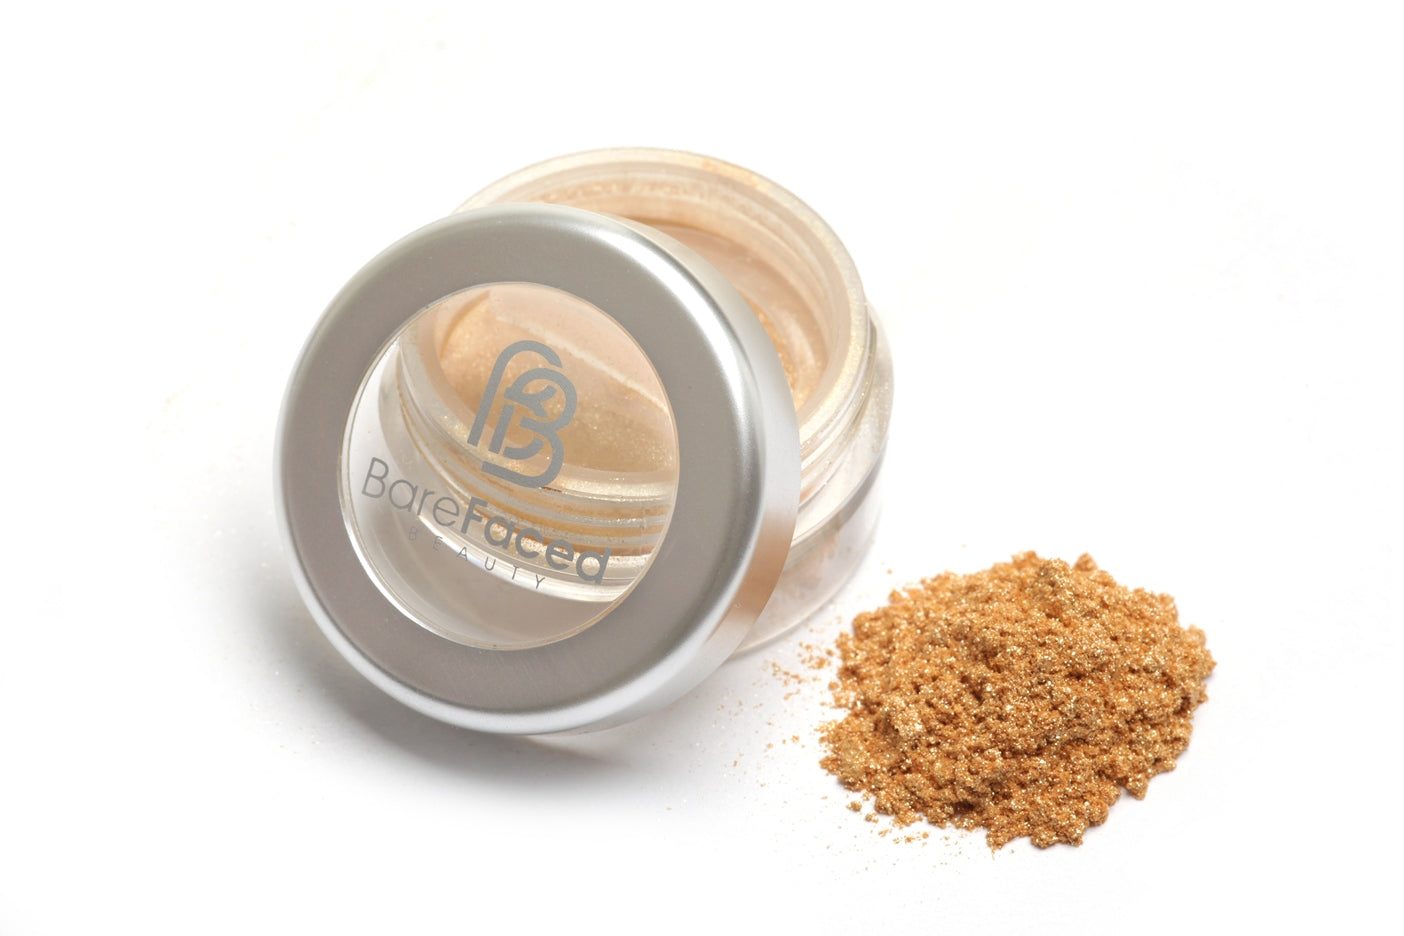 A small round pot of mineral eyeshadow, with a swatch of the powder next to it showing a light shimmery gold shade